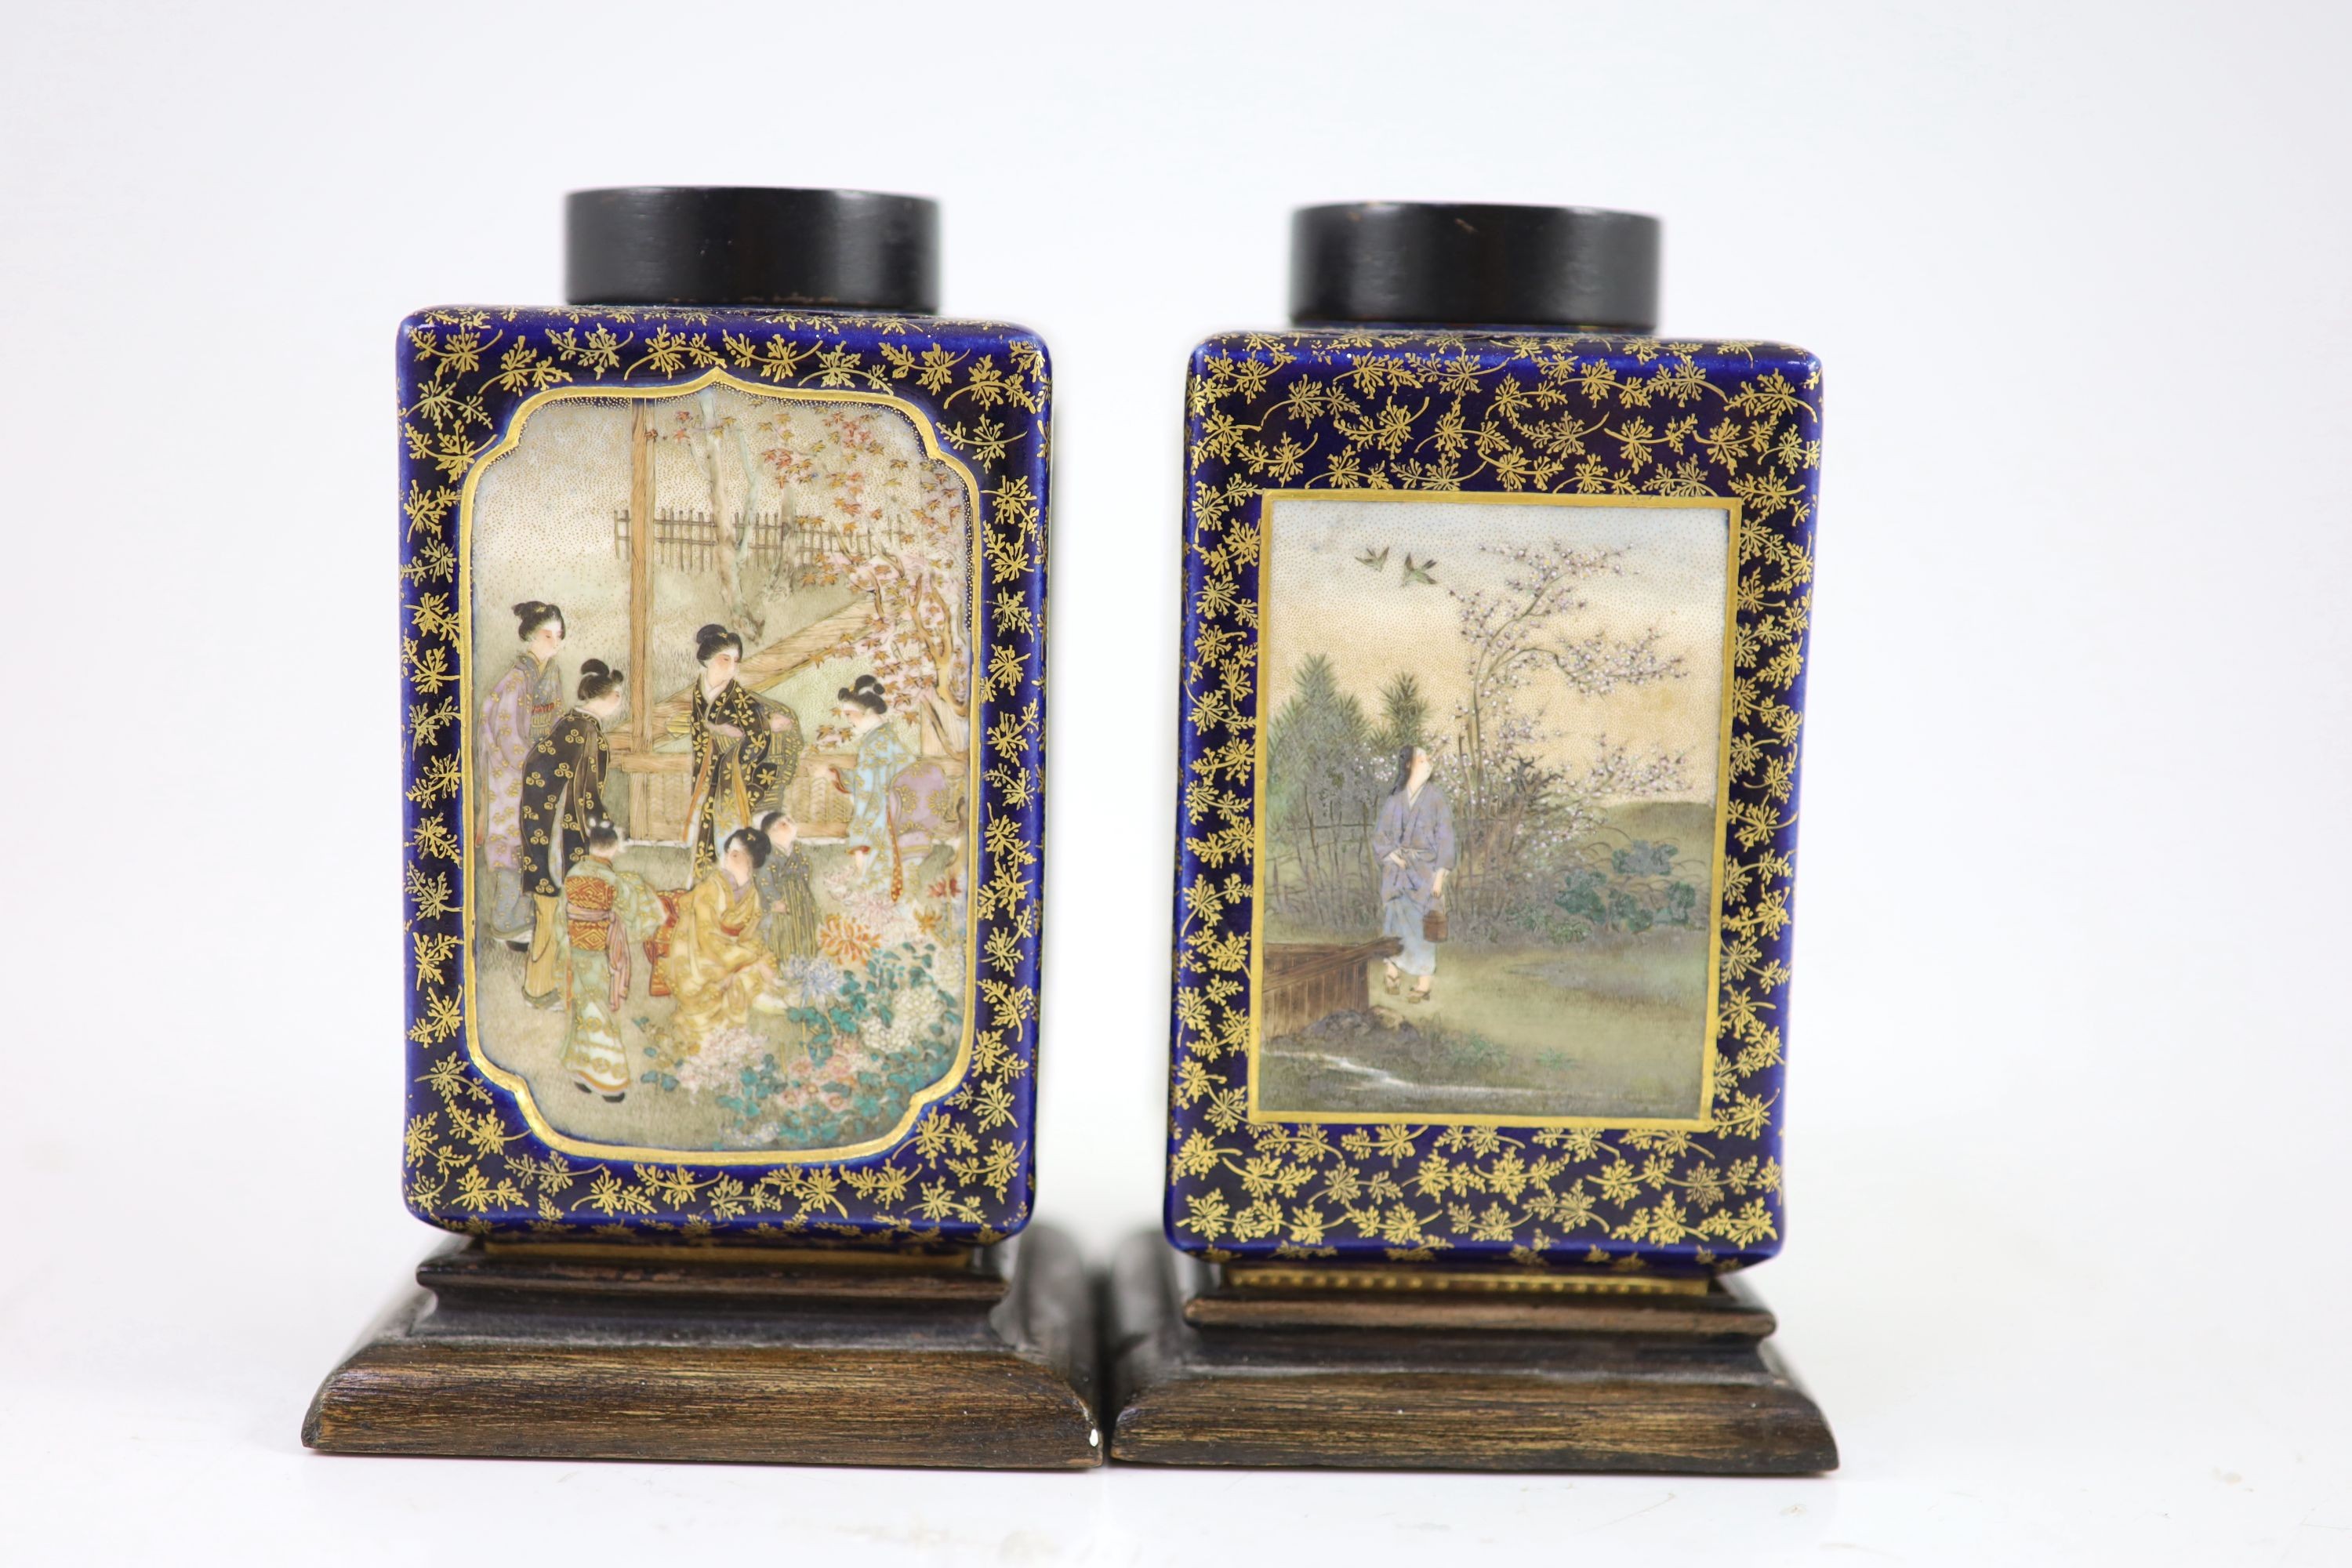 Two fine Satsuma rectangular jars and wooden covers, by Kinkozan, Meiji period, 11cm high, wooden covers and stands